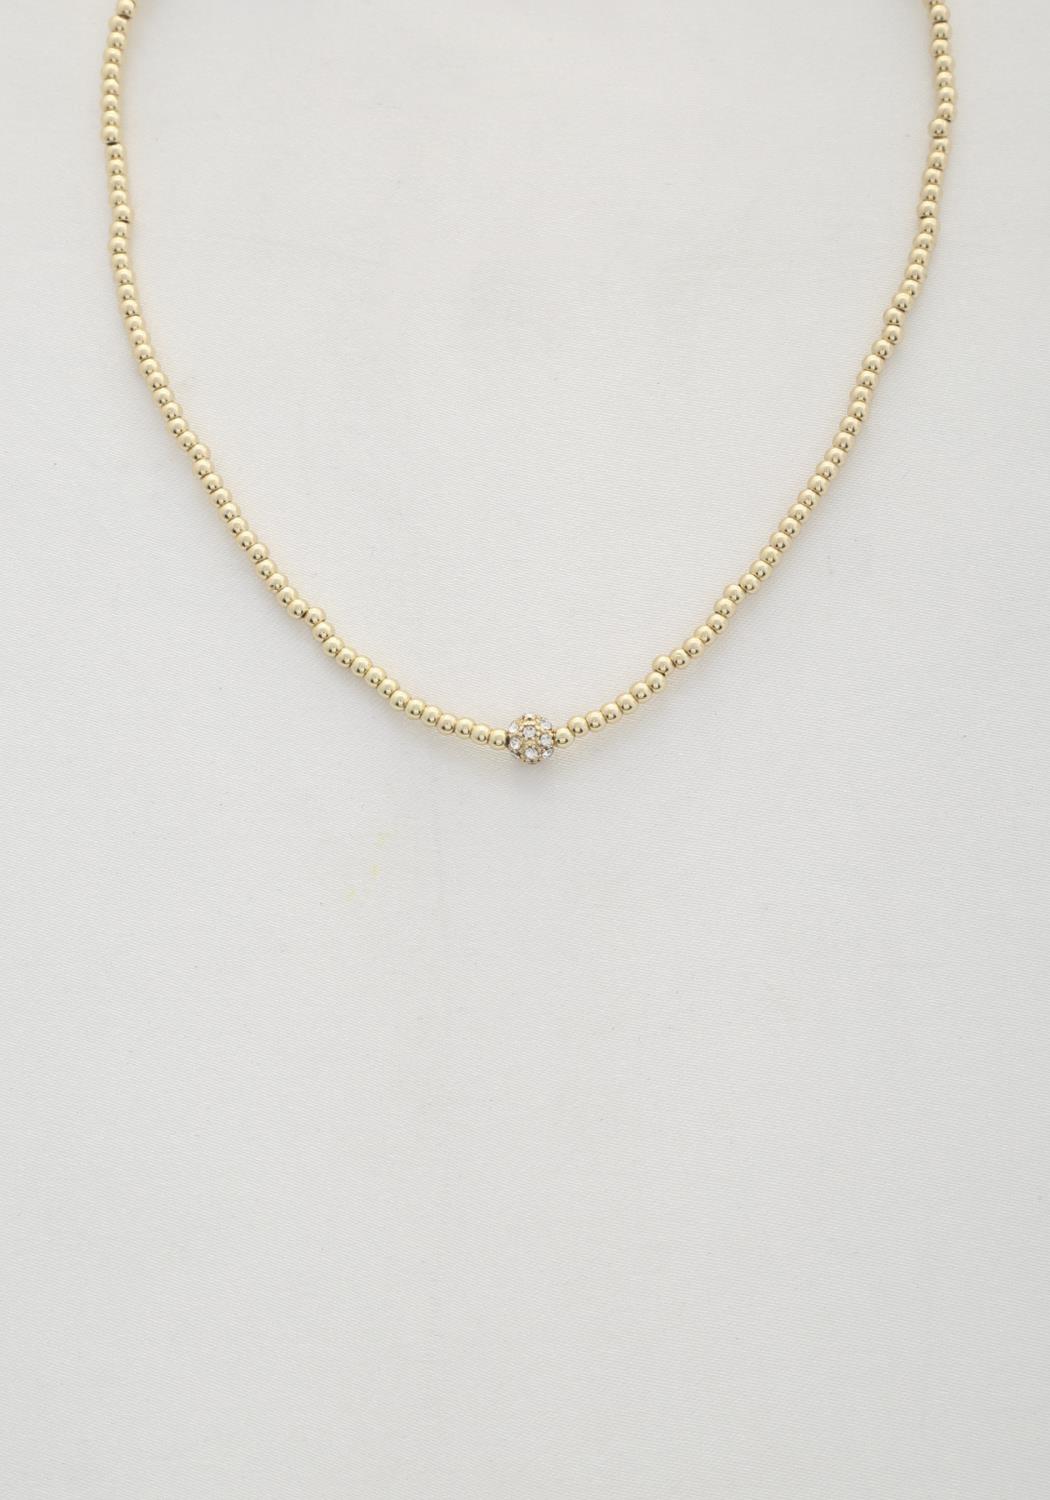 Dainty Round Coin Beaded Necklace